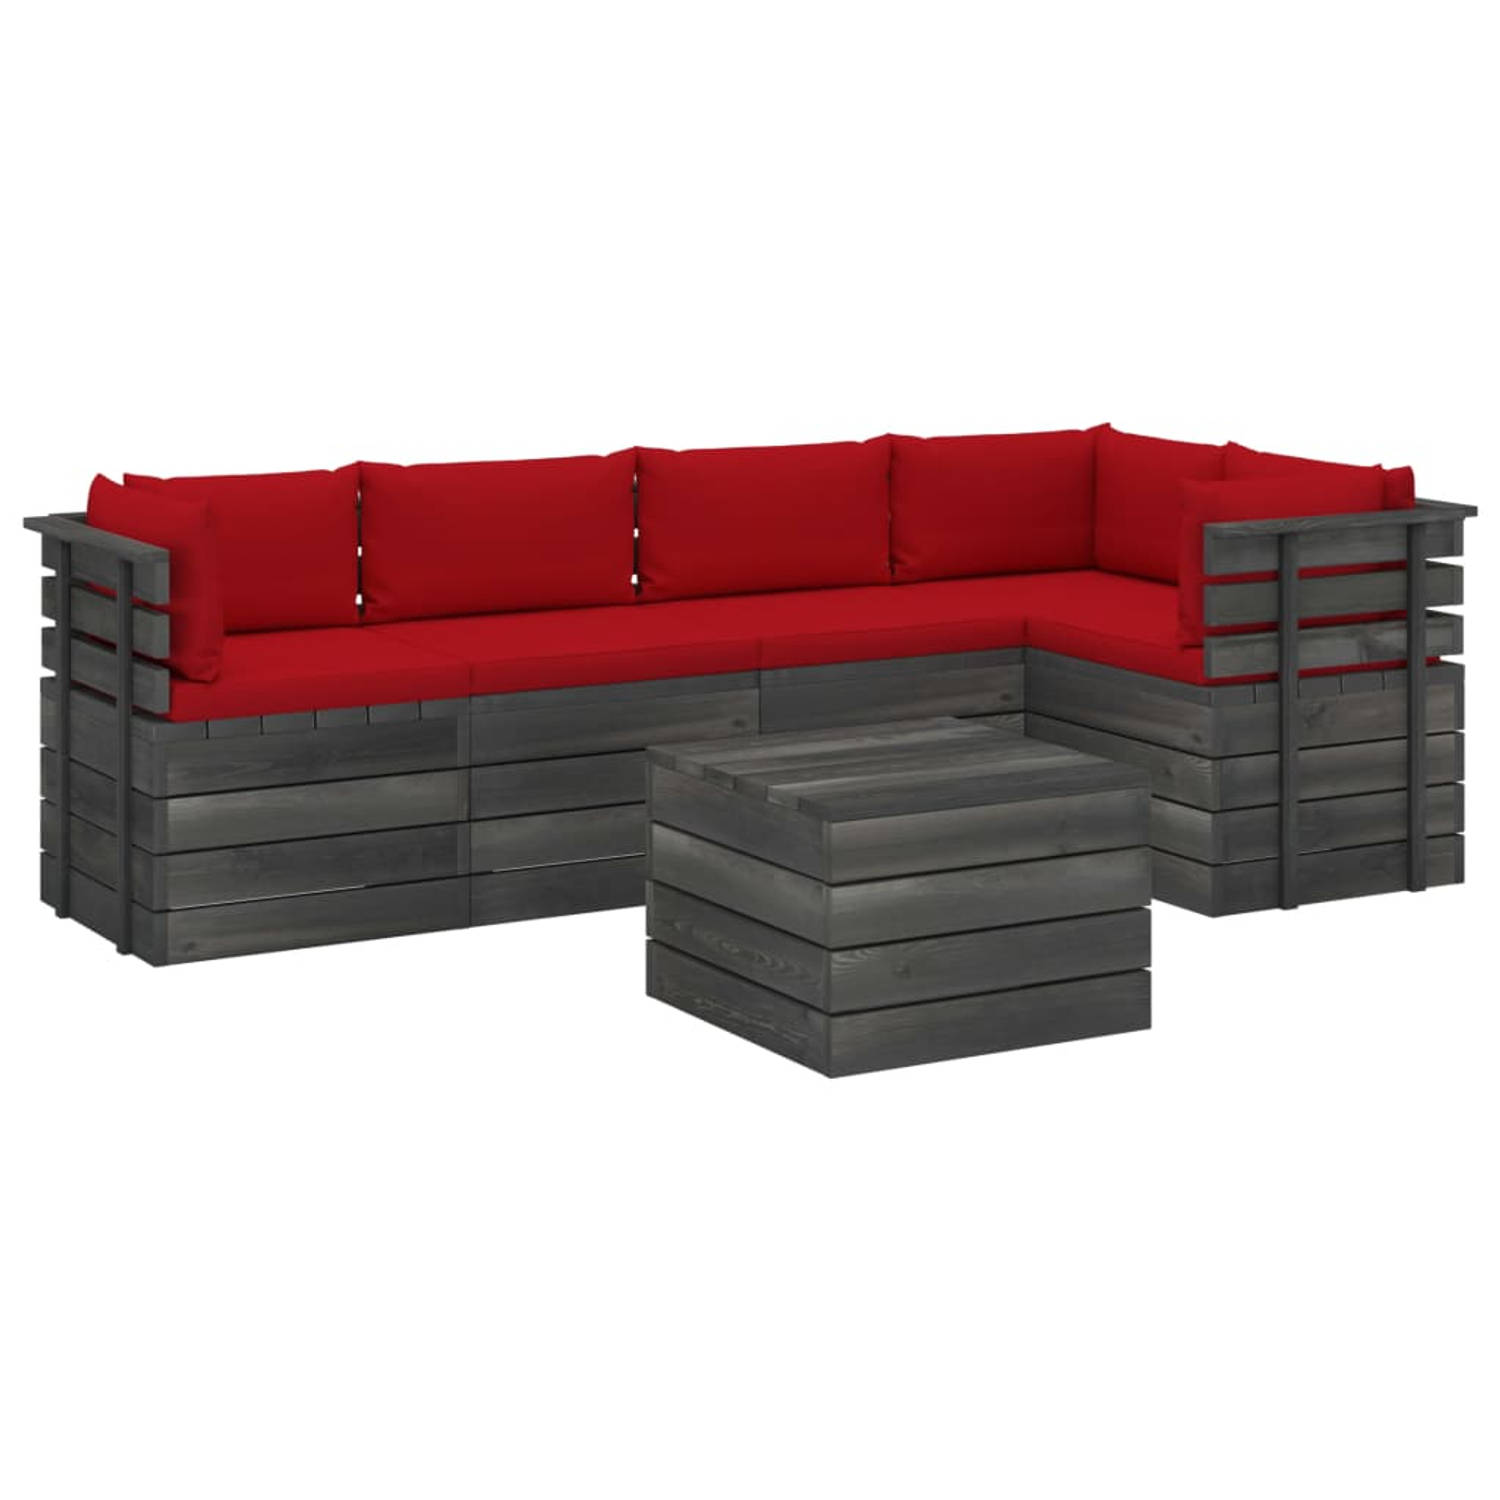 The Living Store Loungeset Pallet - Grenenhout - 60x65x71.5 cm - Rood kussen